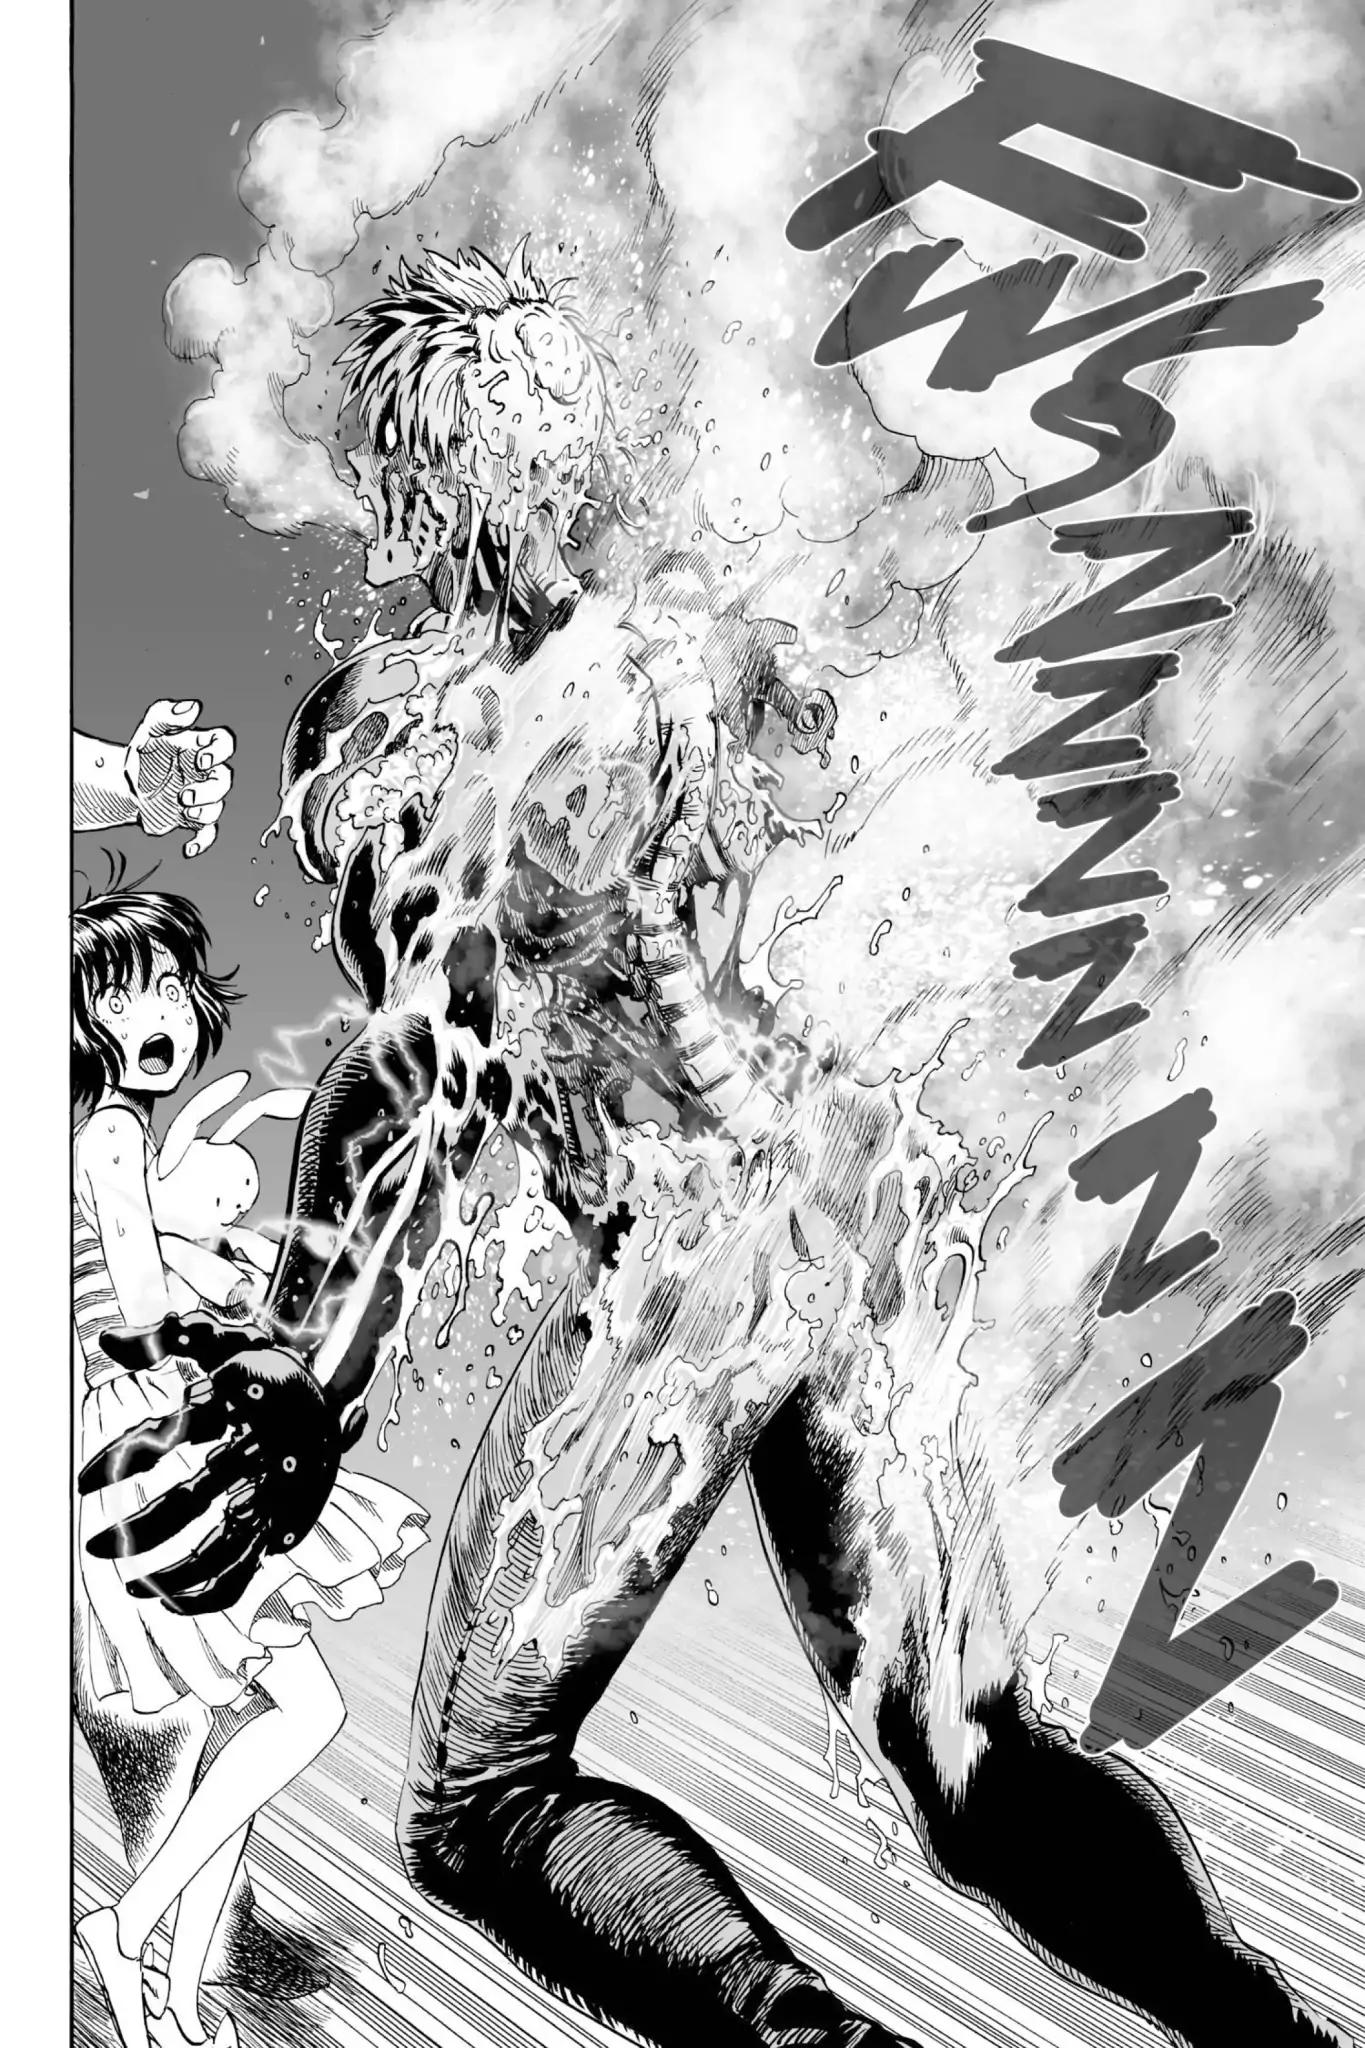 One-Punch Man chapter 27 page 2